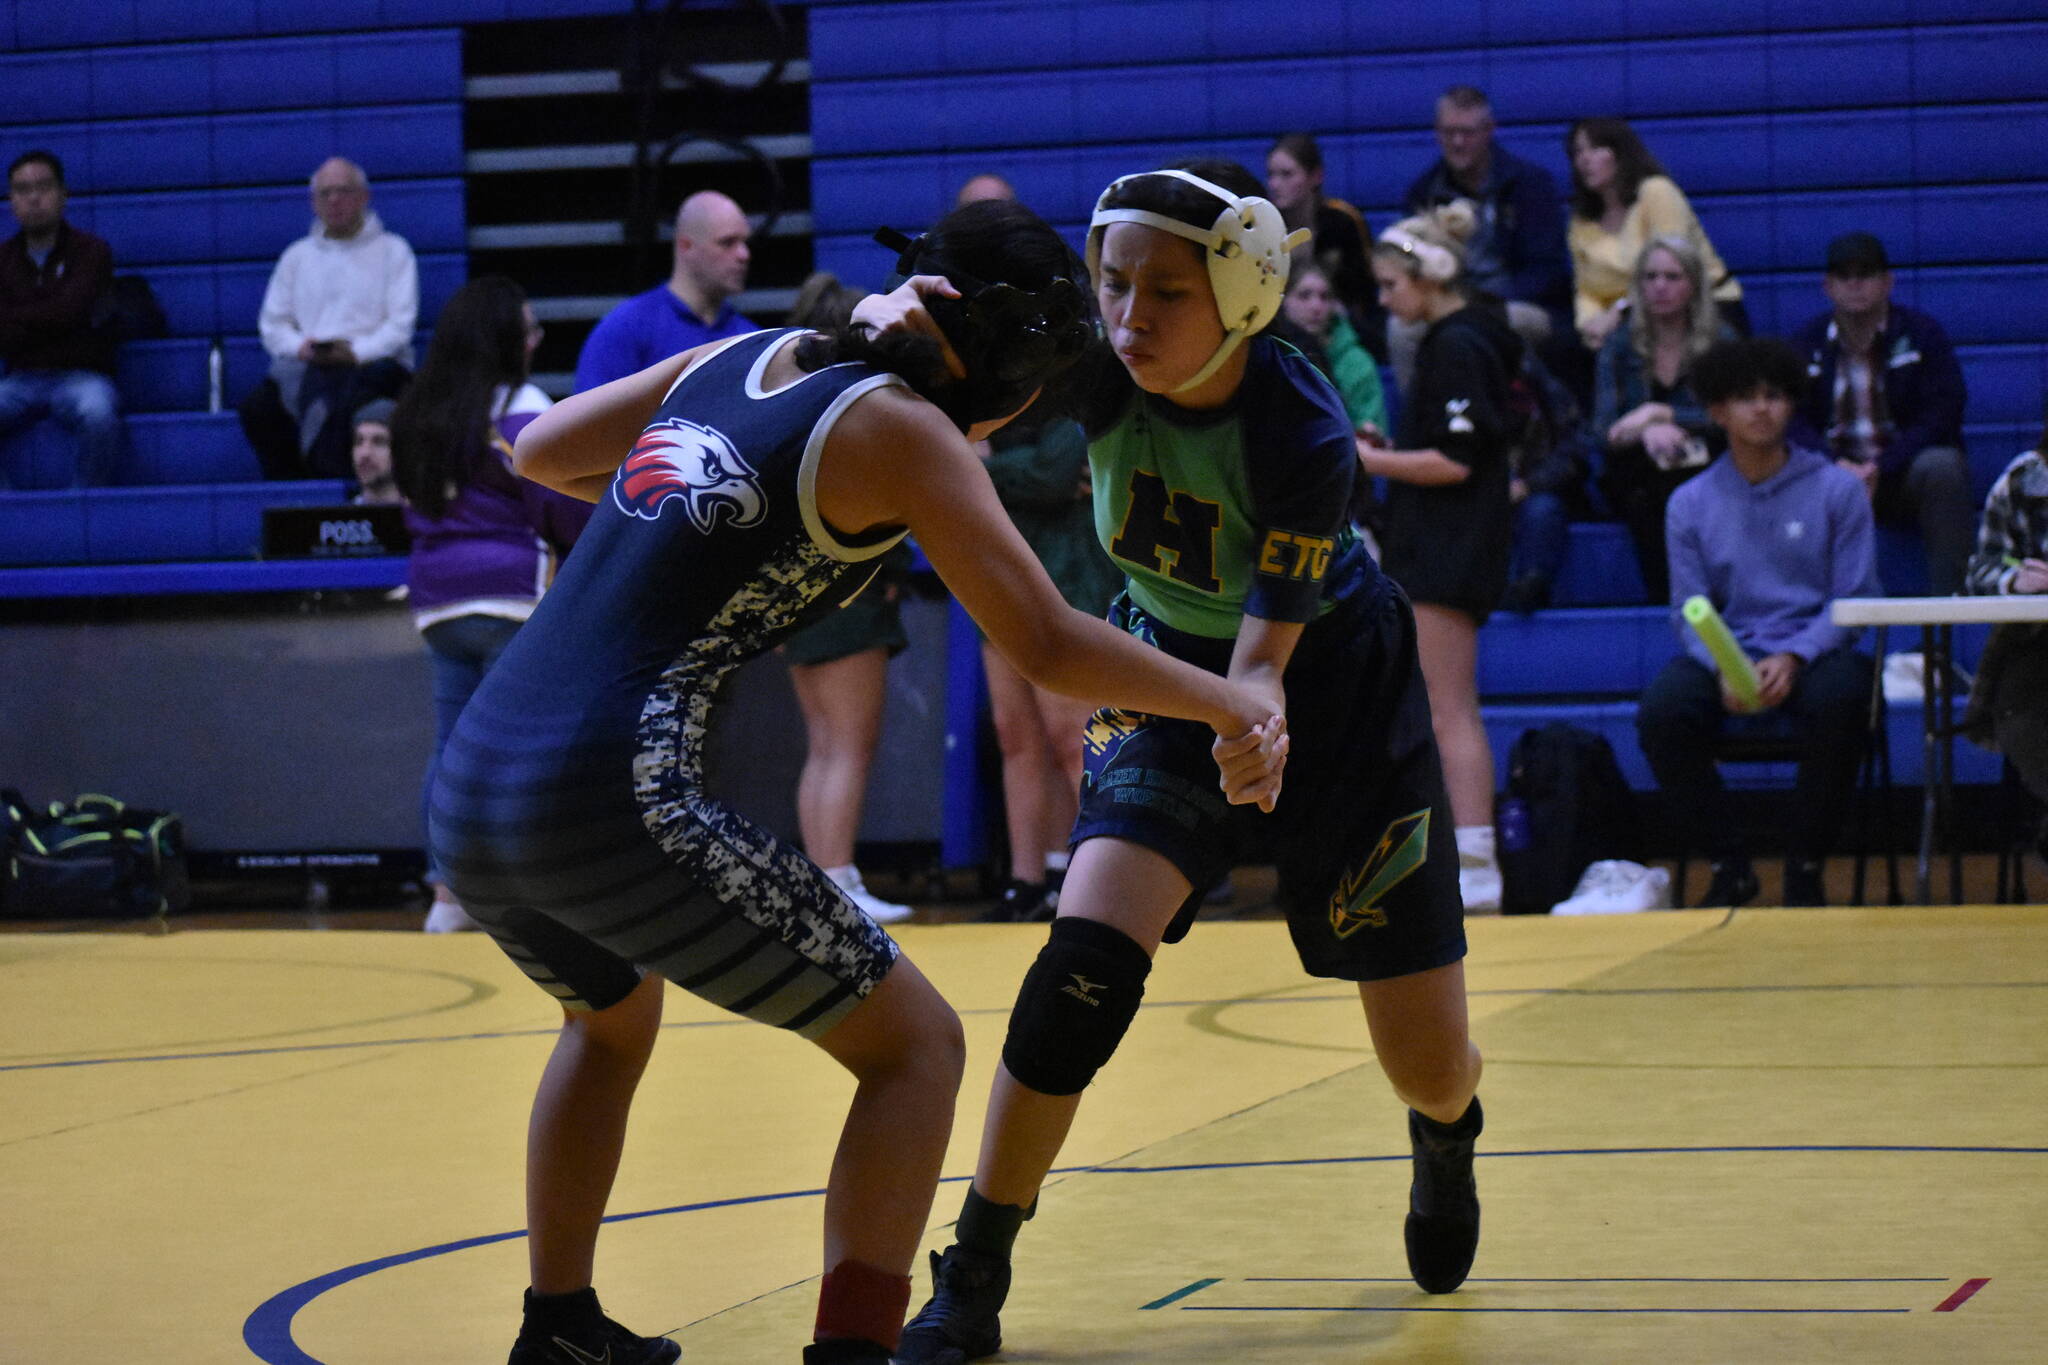 Photo by Ben Ray
Lindbergh and crosstown rival Hazen get after it in the opening match of the evening.